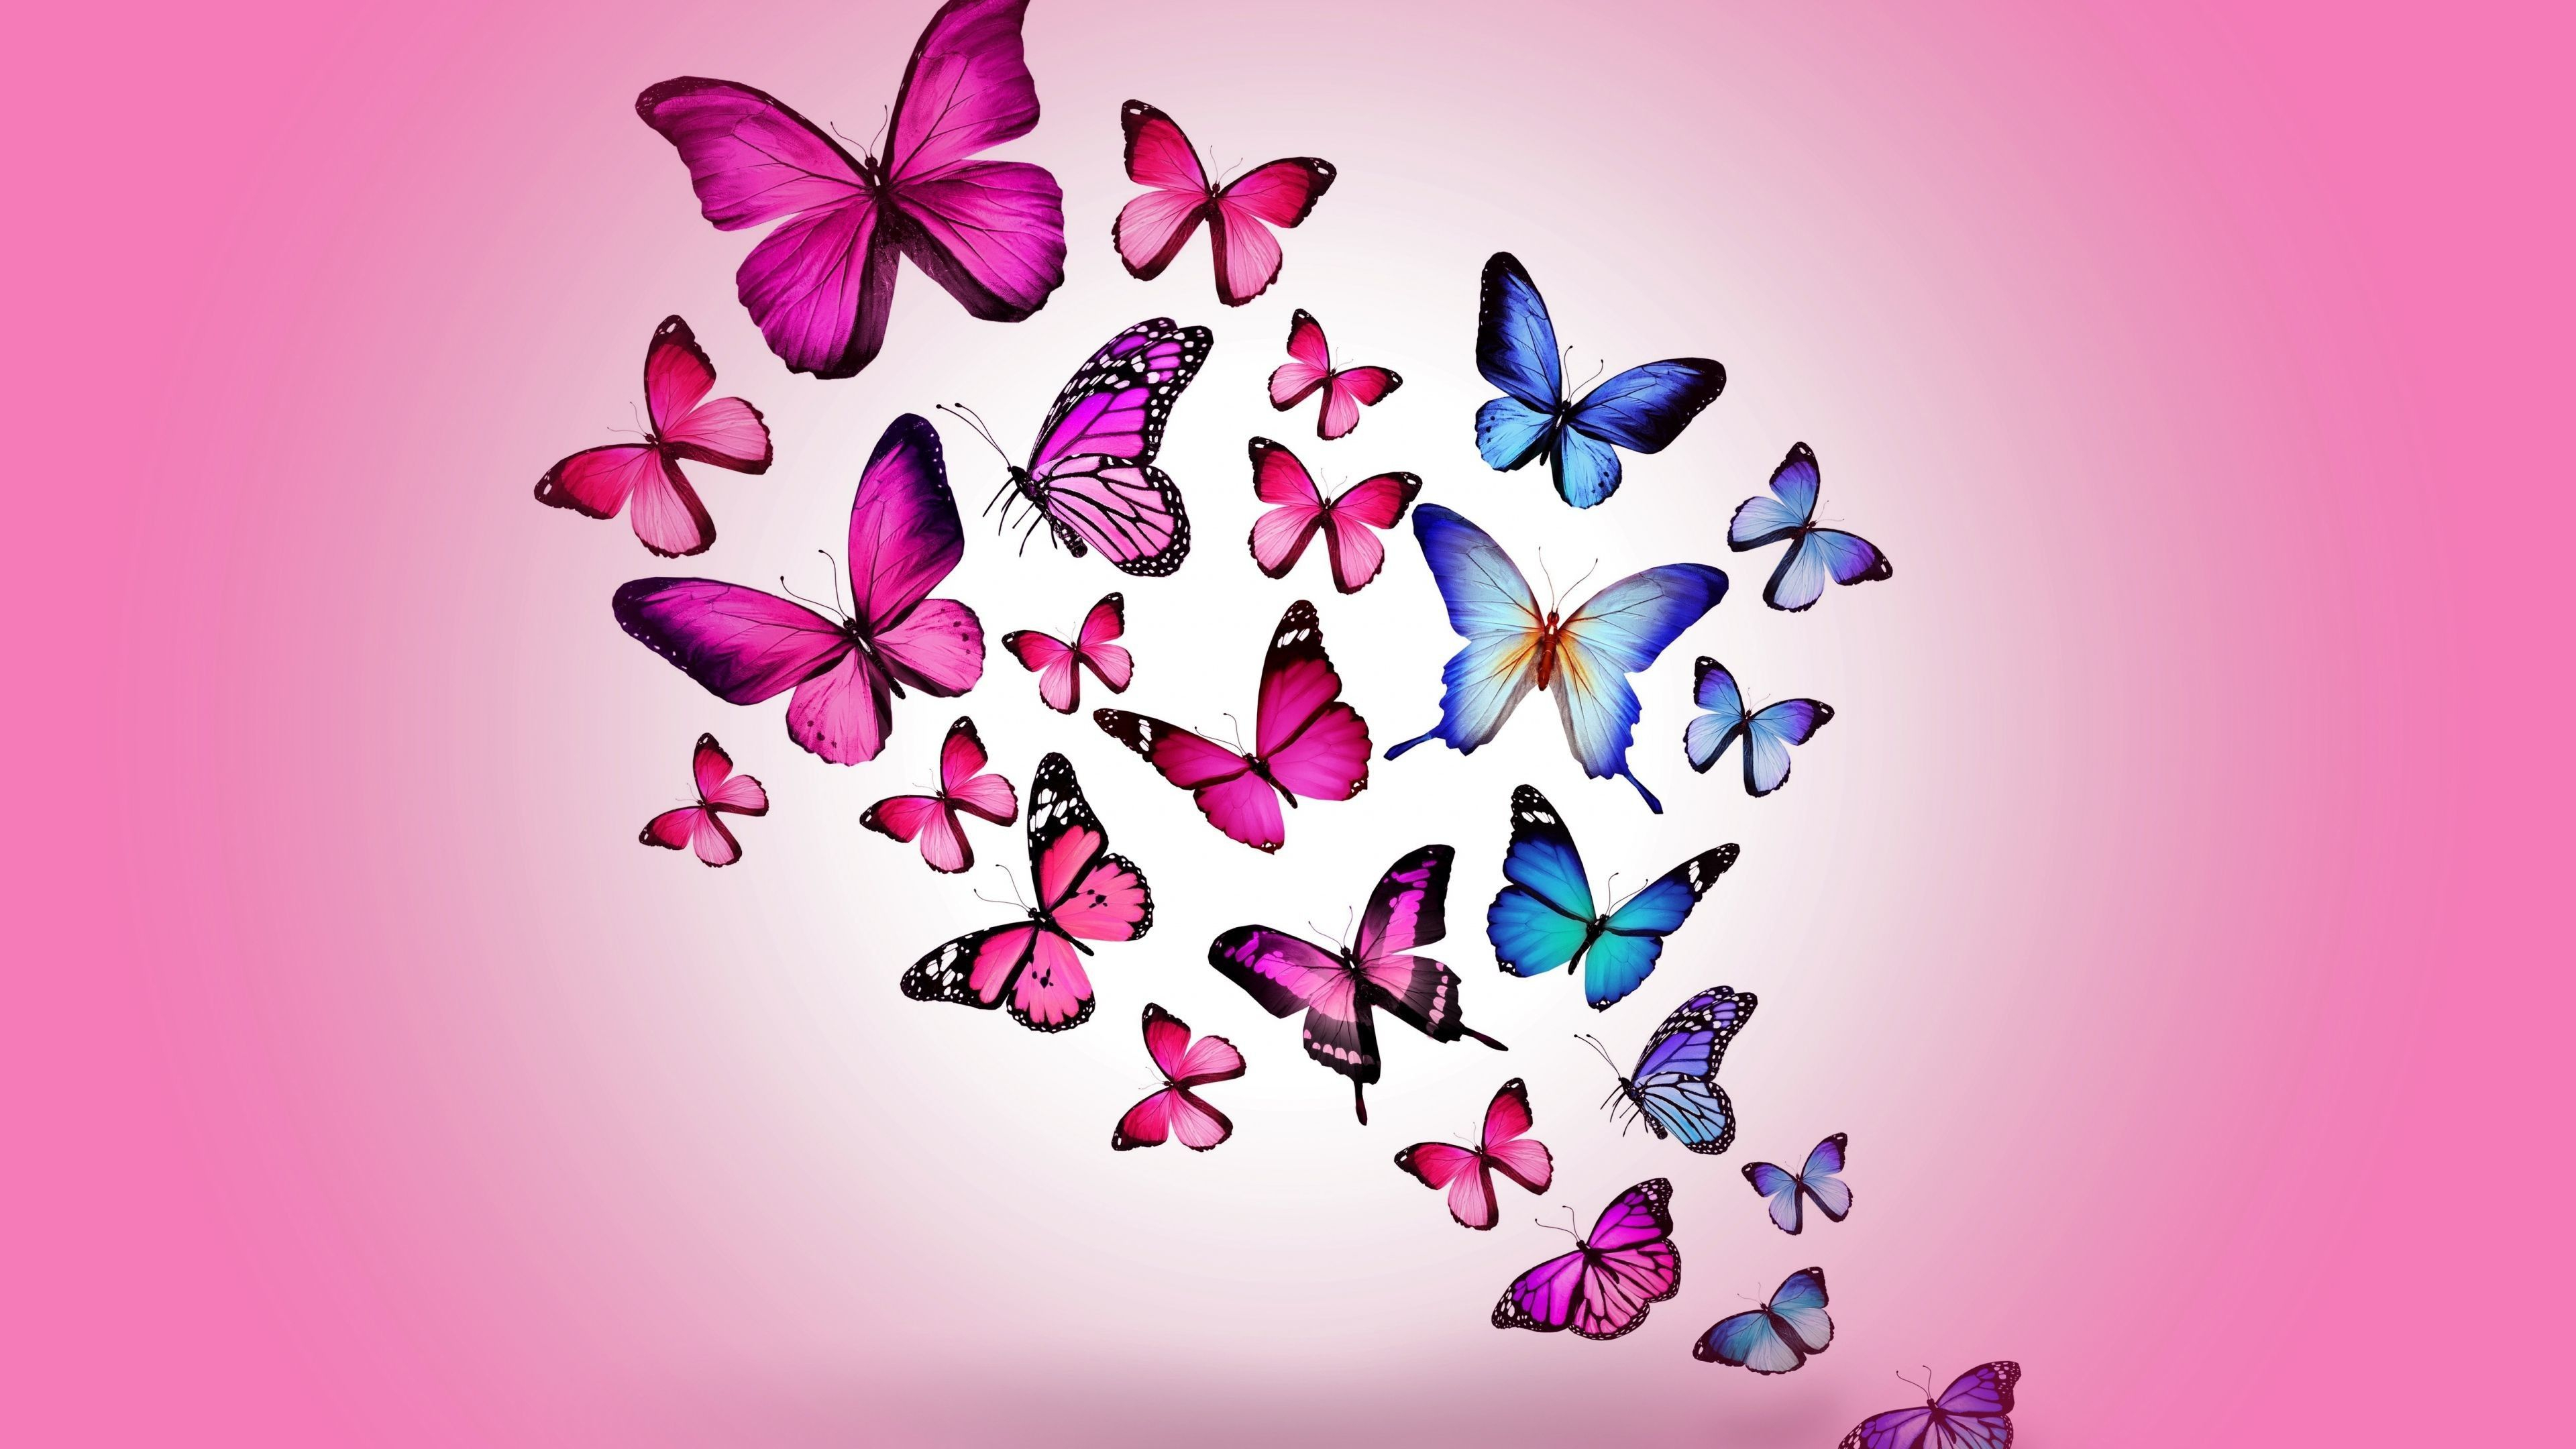 3840x2160 Blue and Pink Butterfly Wallpapers Top Free Blue and Pink Butterfly Backgrounds